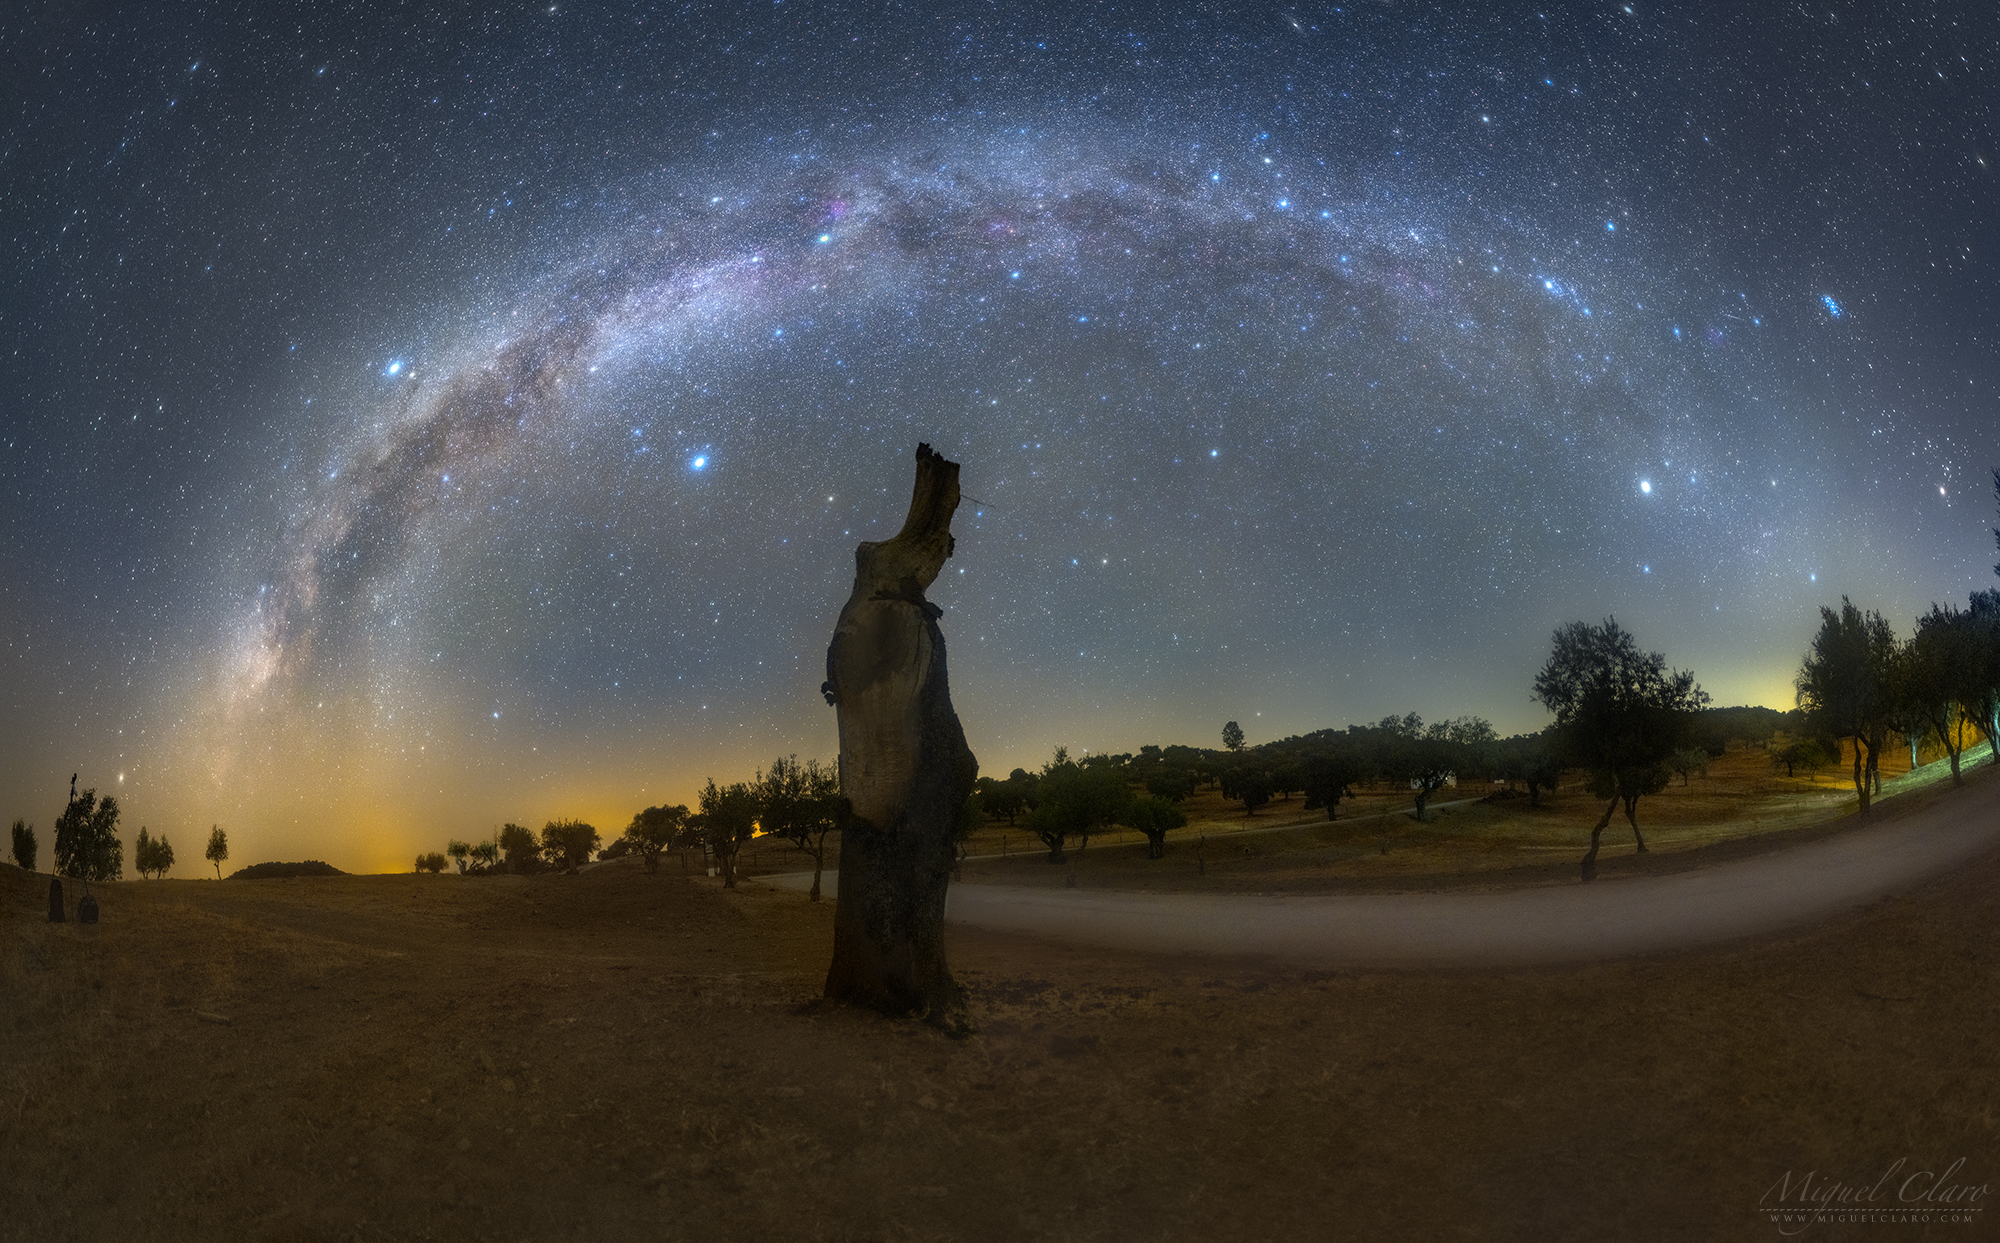 Milky Way's seasonal transition captured in gorgeous night sky ...